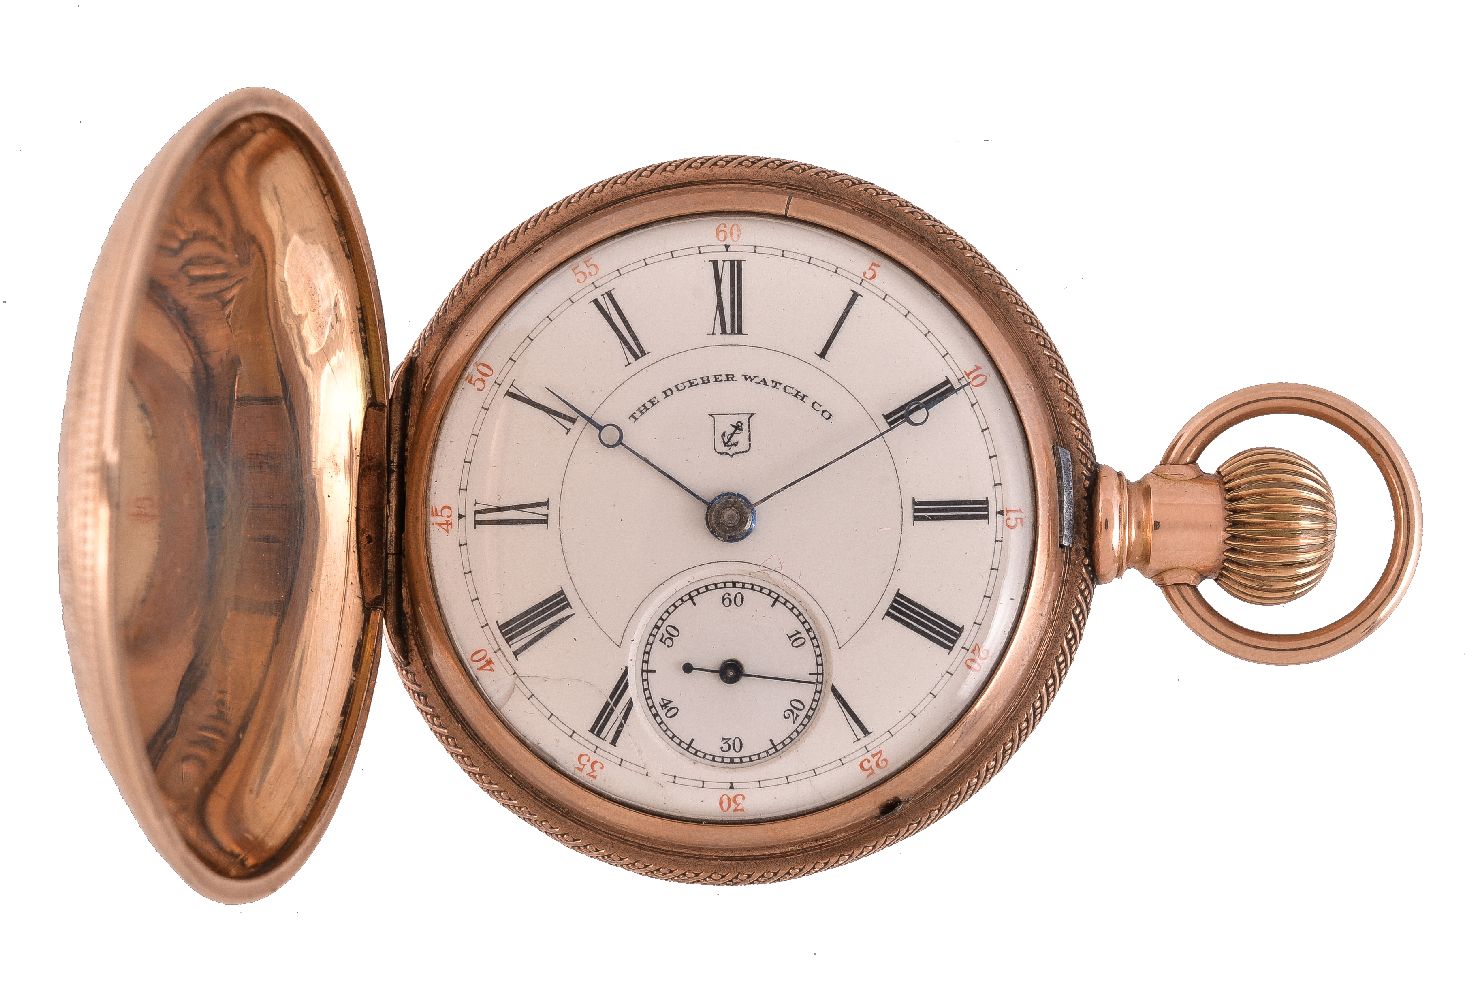 The Dueber Watch Co., Gold coloured full hunter keyless wind pocket watch